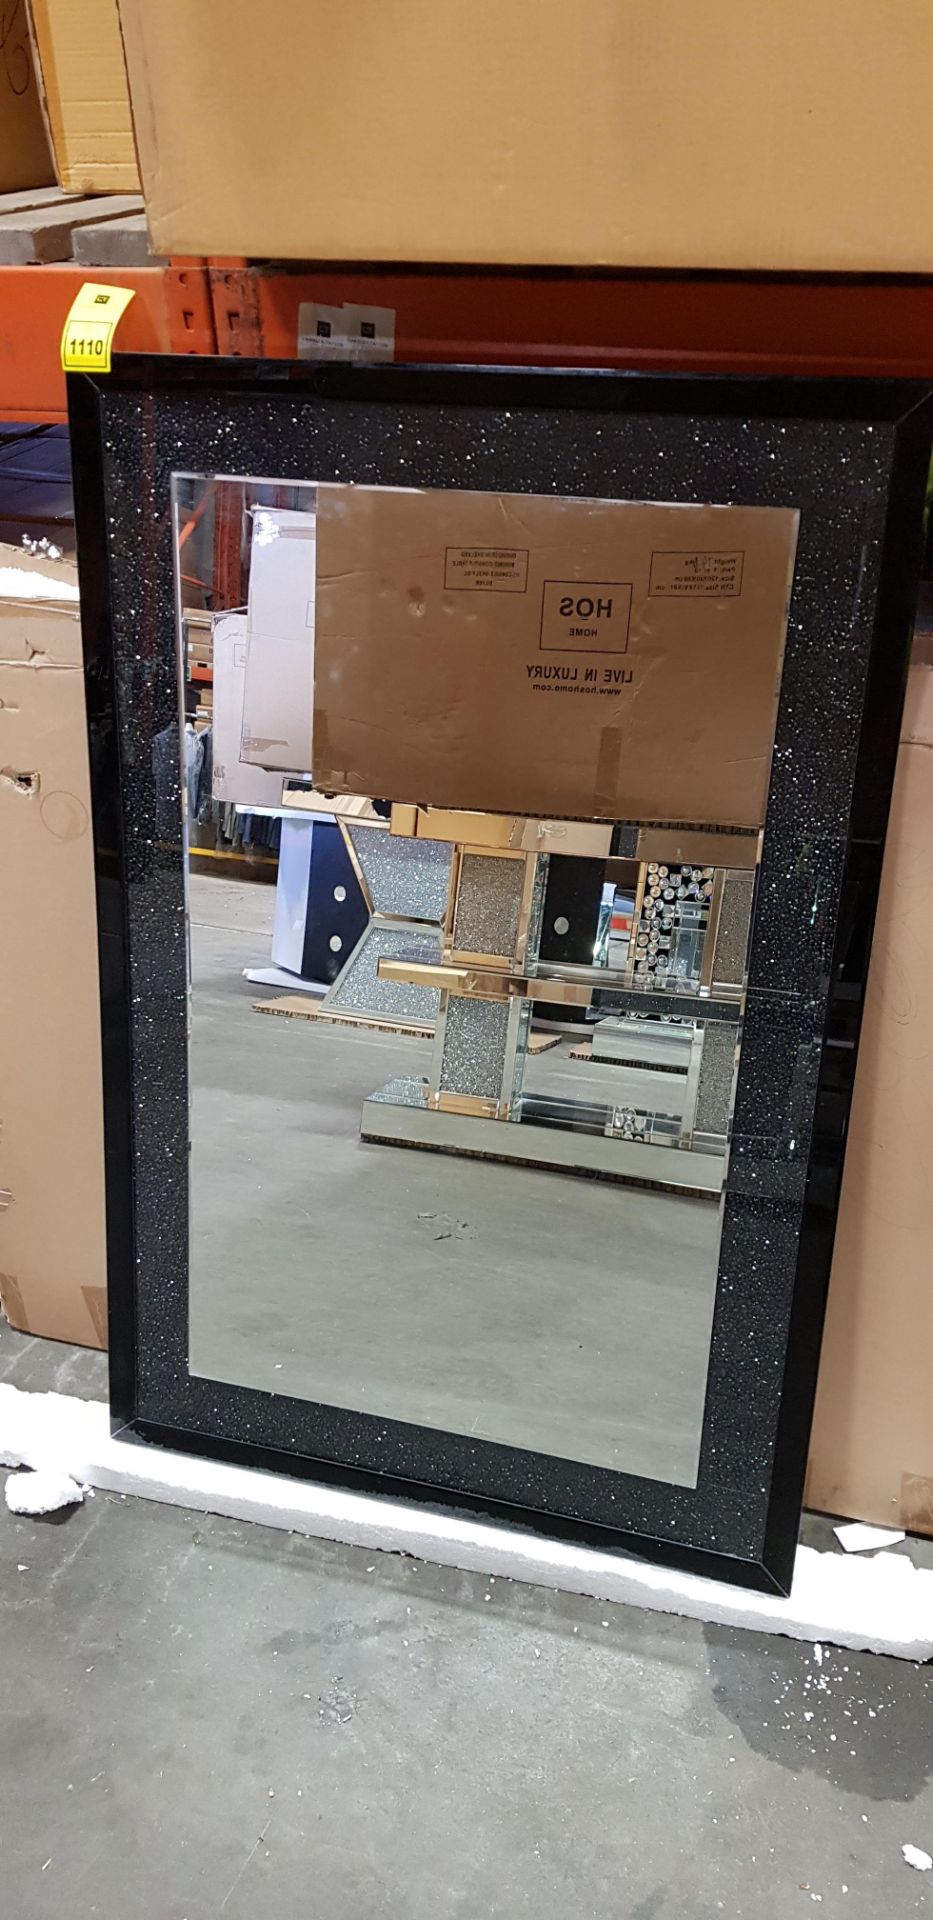 1 X BLACK MIRROR CRUSH WALL MIRROR (120X80X4CM) - WITH BOX - DAMAGED ON SIDE ** NOTE: THESE ITEMS